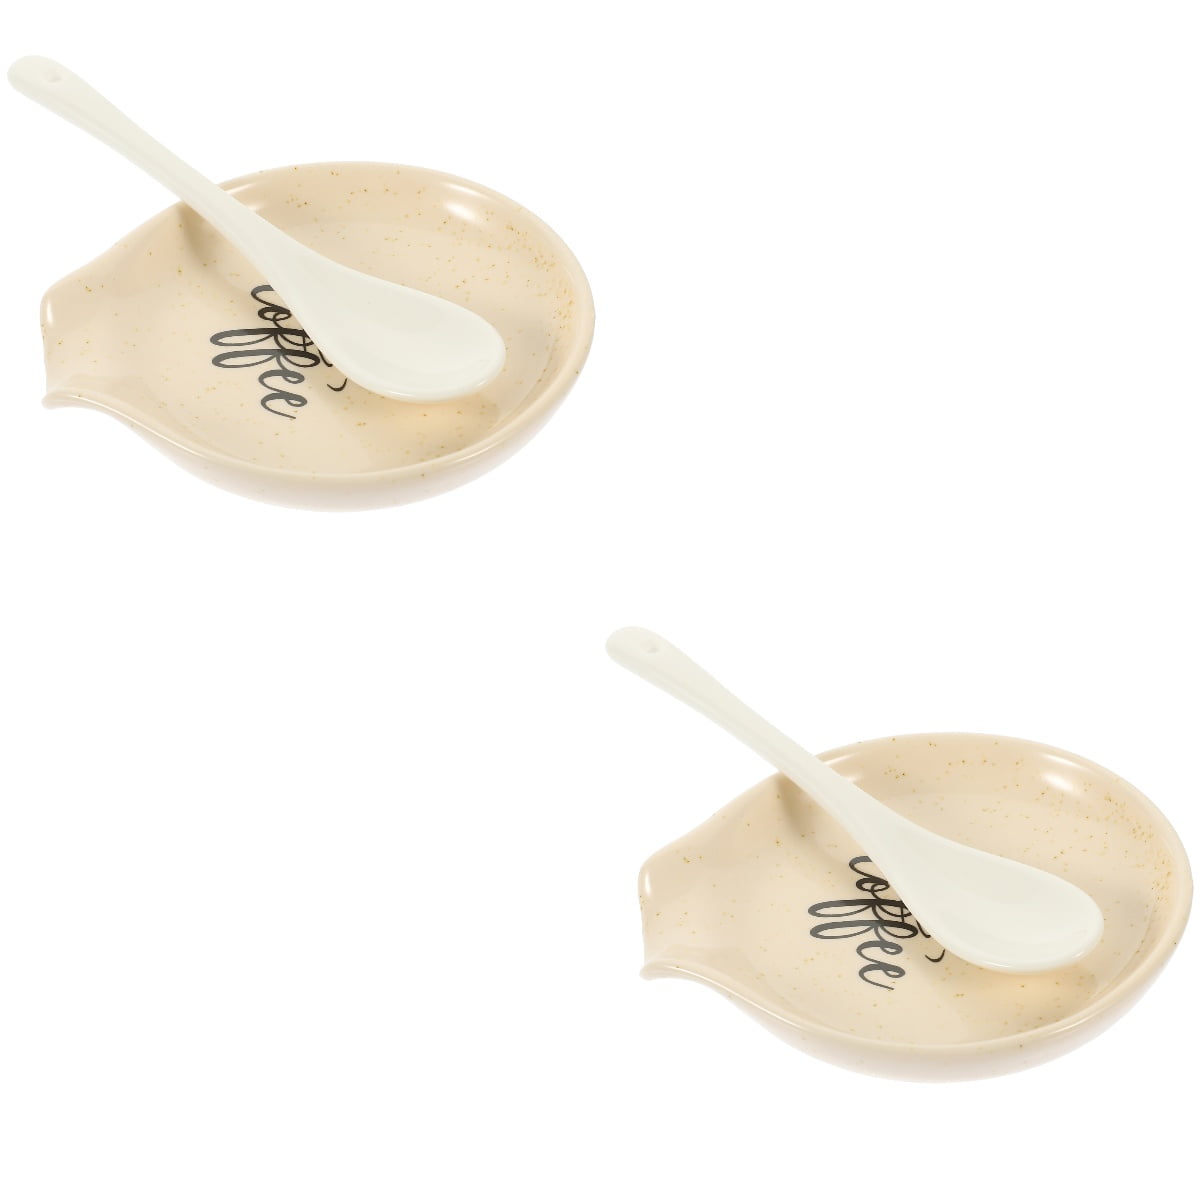 TWO PACK - Coffee Spoon Rest, White Ceramic Spoon Holder Trays For Coffee  Bar Station or Kitchen Counter, Includes 2 Small Spoons and 2 Cork  Coasters